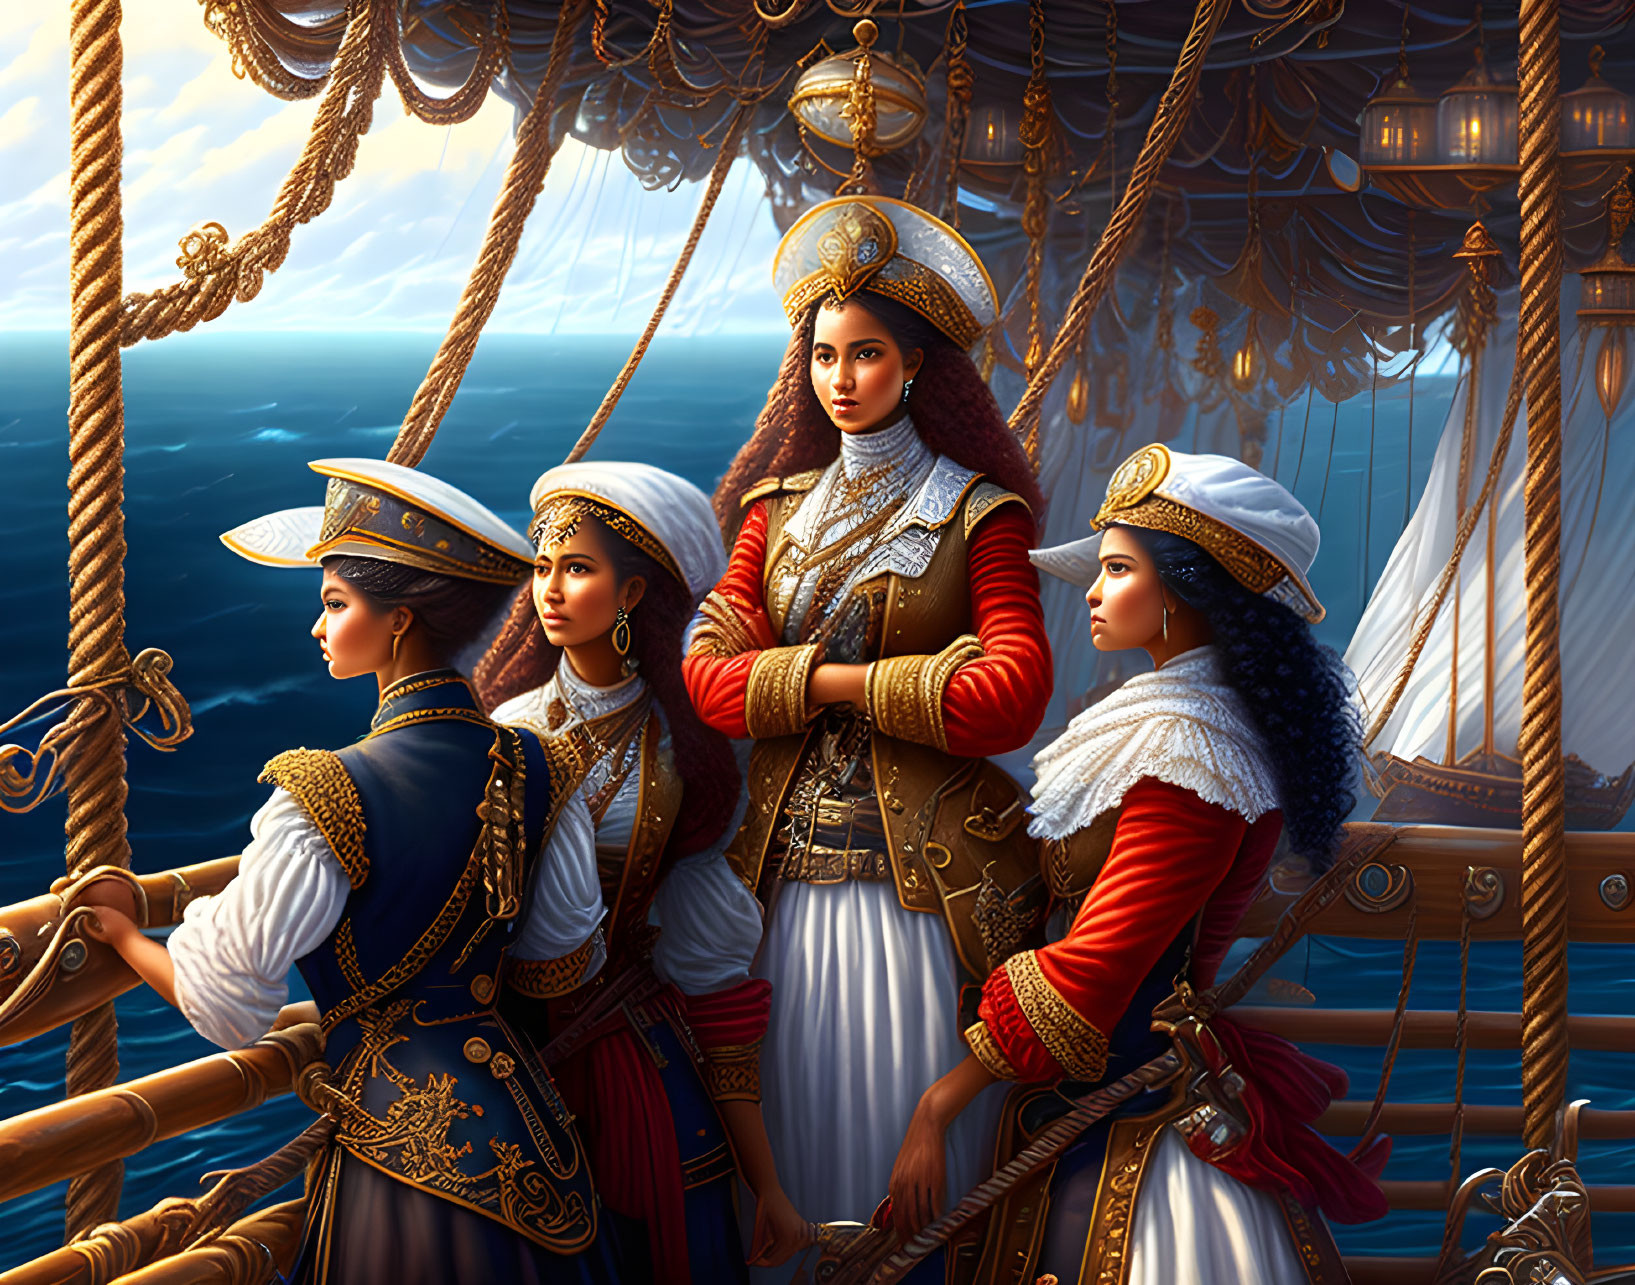 Four Women in Ornate Naval Uniforms Aboard Ship with Ocean and Sails